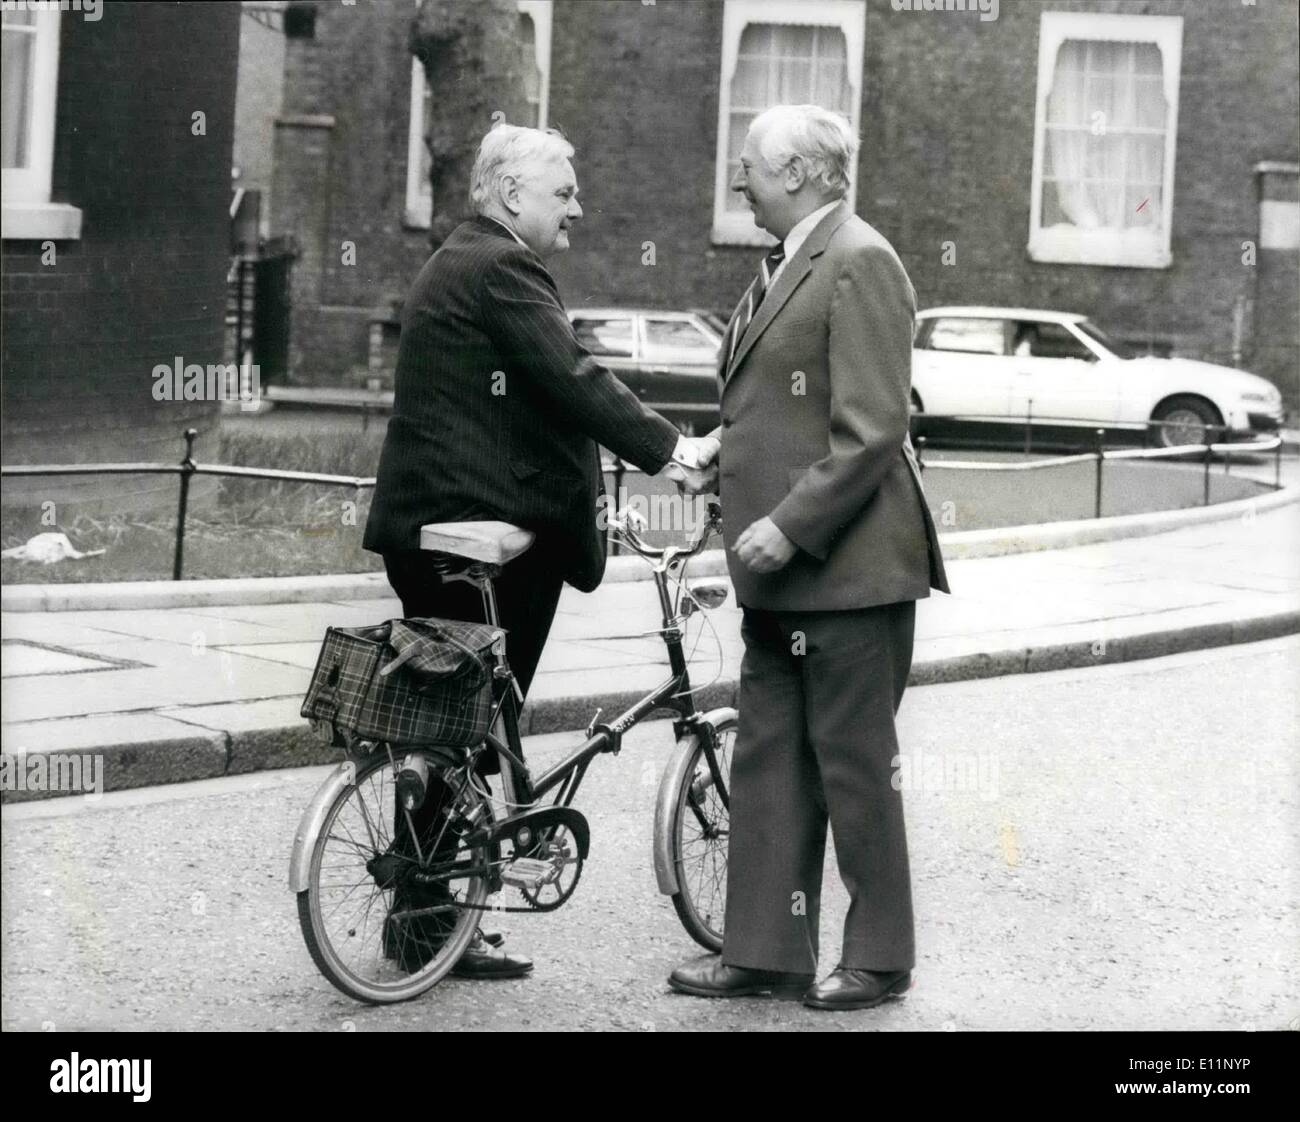 May 05, 1979 - Early Arrivals at No. 10 Downing Street. Mrs. Margaret Thatcher spent her day at No. 10 receiving a stream of Tory possibles for her cabinet. During the morning Lord Hailsham - a former Lord Chancellor - arrived on his bicycle and meet Mr. James Prior arriving on foot, and coatless in the Spring sunshine. Stock Photo